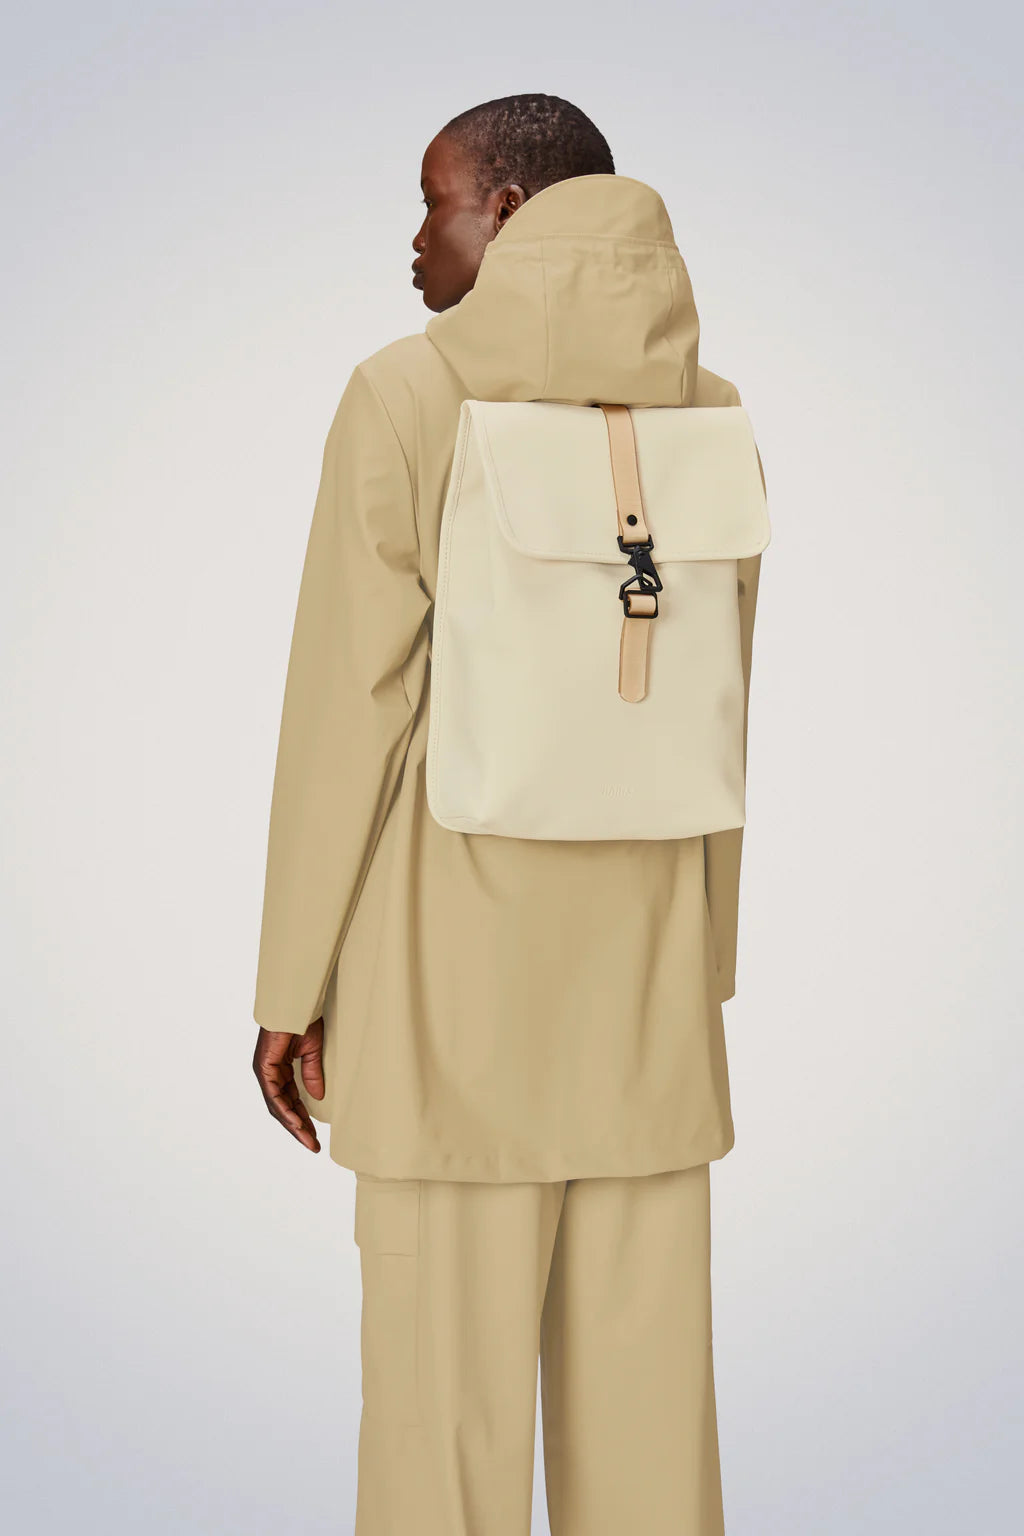 Rains Rucksack: The back view of a woman wearing a beige Rains rucksack, this perfect companion includes a laptop sleeve and two side pockets for easy access to water bottles or other essentials. The padded